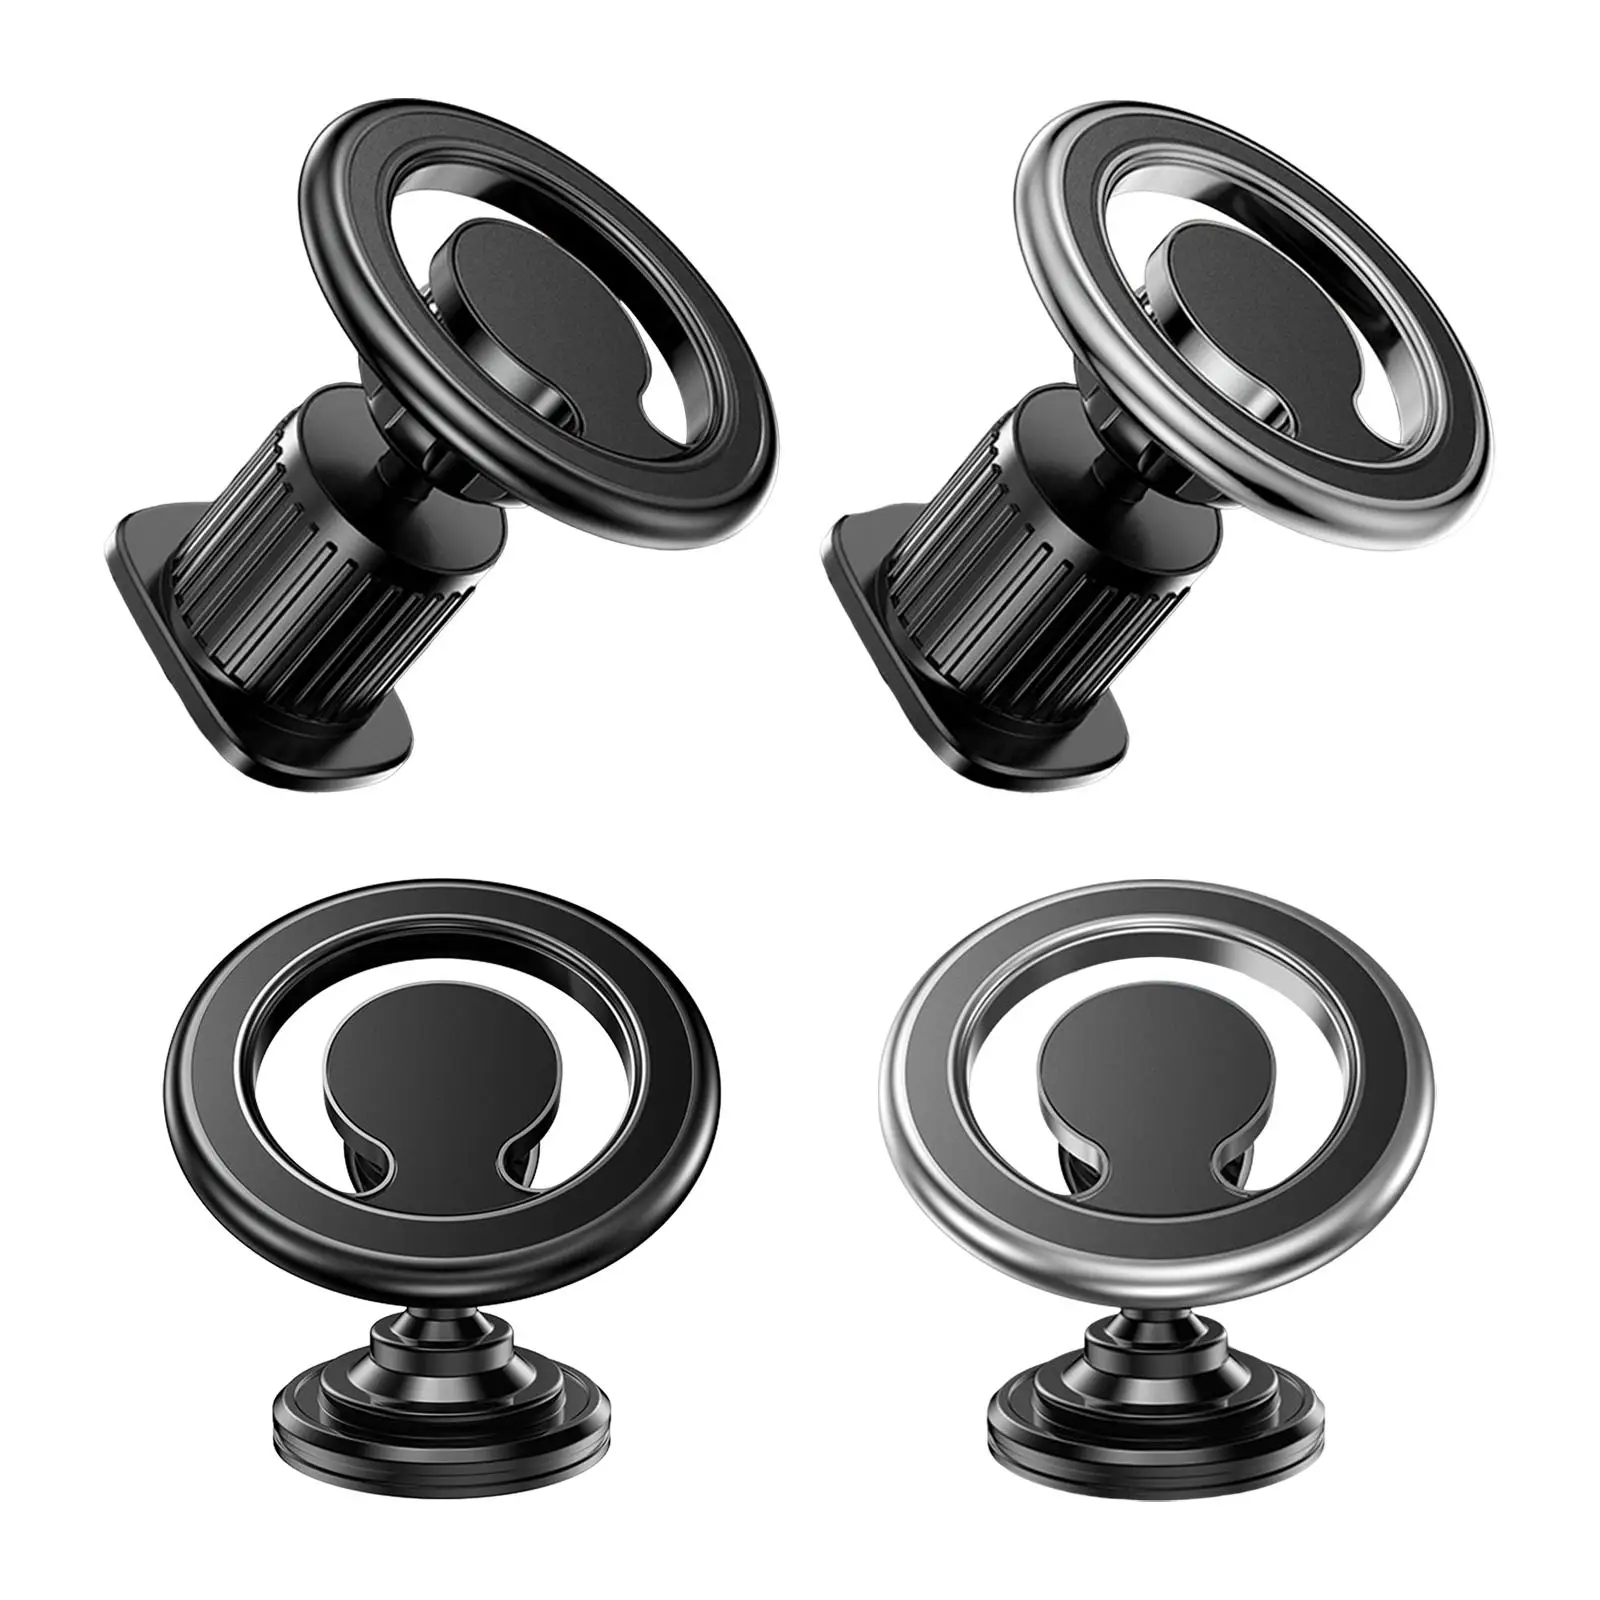 Compact Car Phone Holder Adjustable Easily Install Aluminum Alloy Phone Cradle